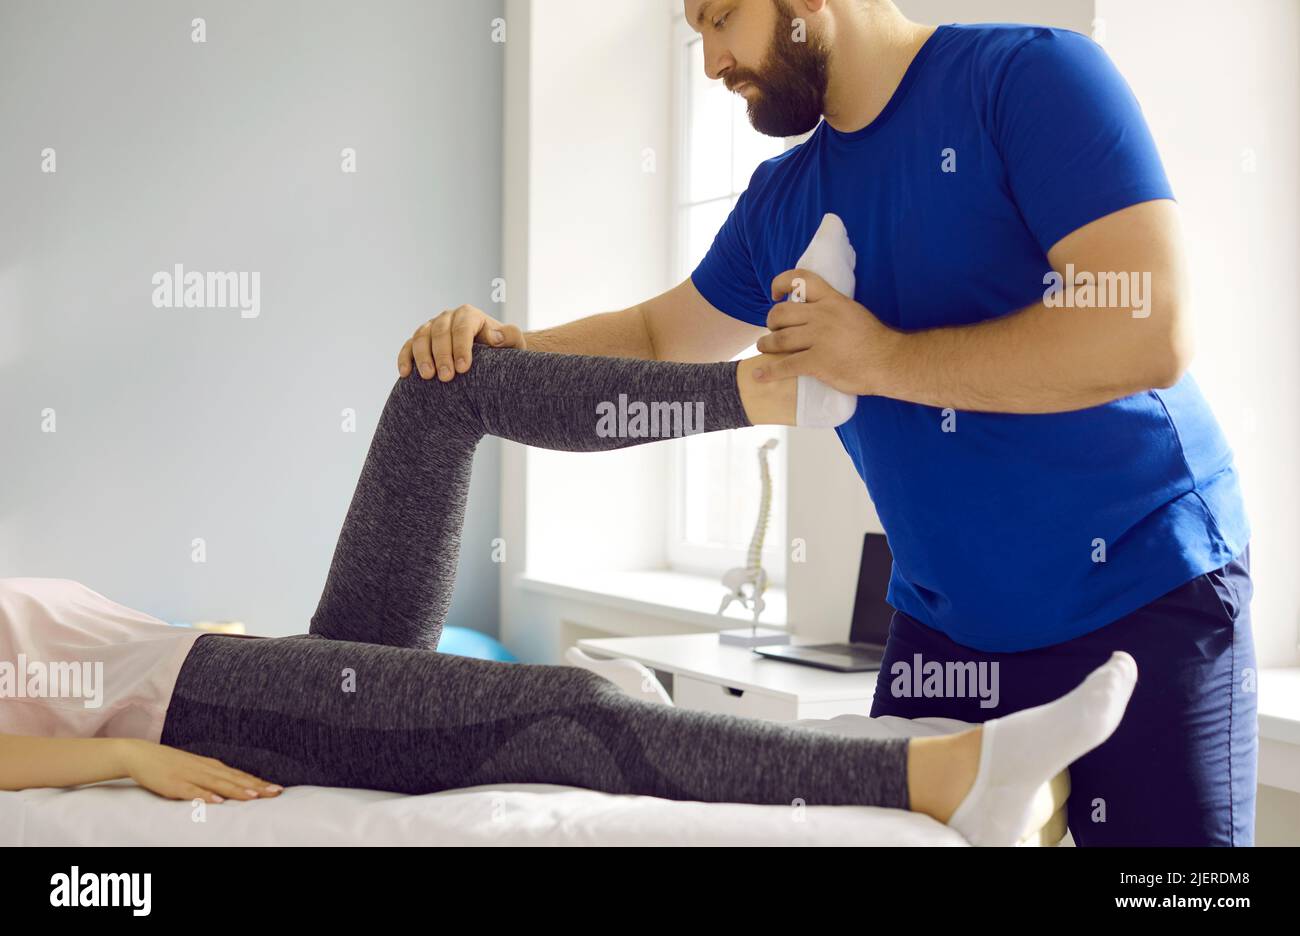 Pprofessional male masseur therapist kneads female patient's leg in physiotherapy clinic. Stock Photo